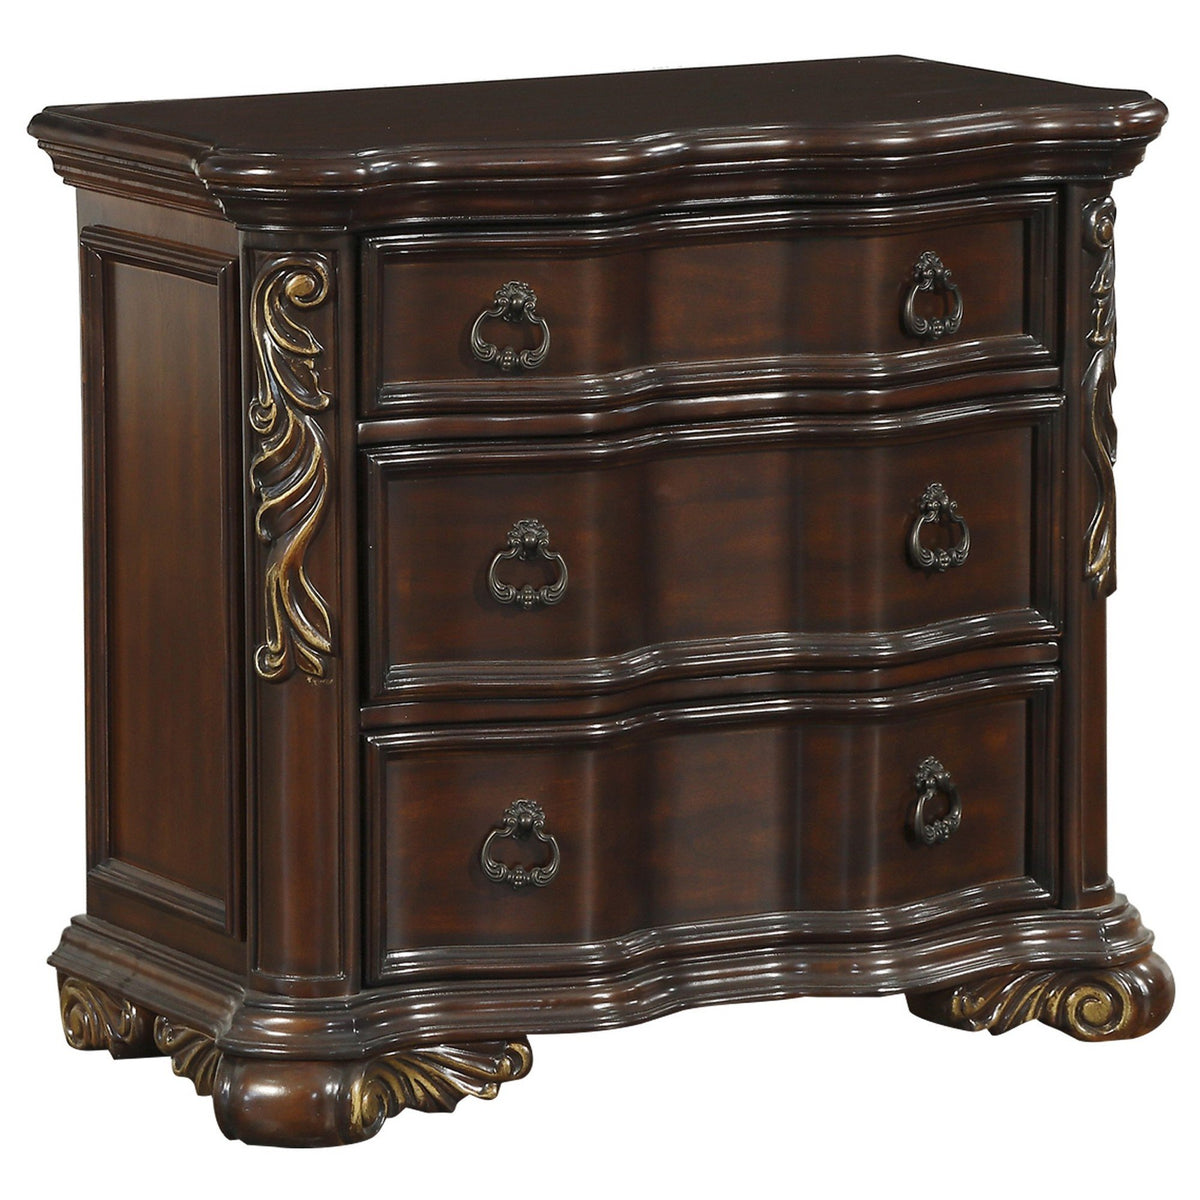 3 Drawer Nightstand with Carved Pilaster and Bracket Feet, Cherry Brown - BM219079